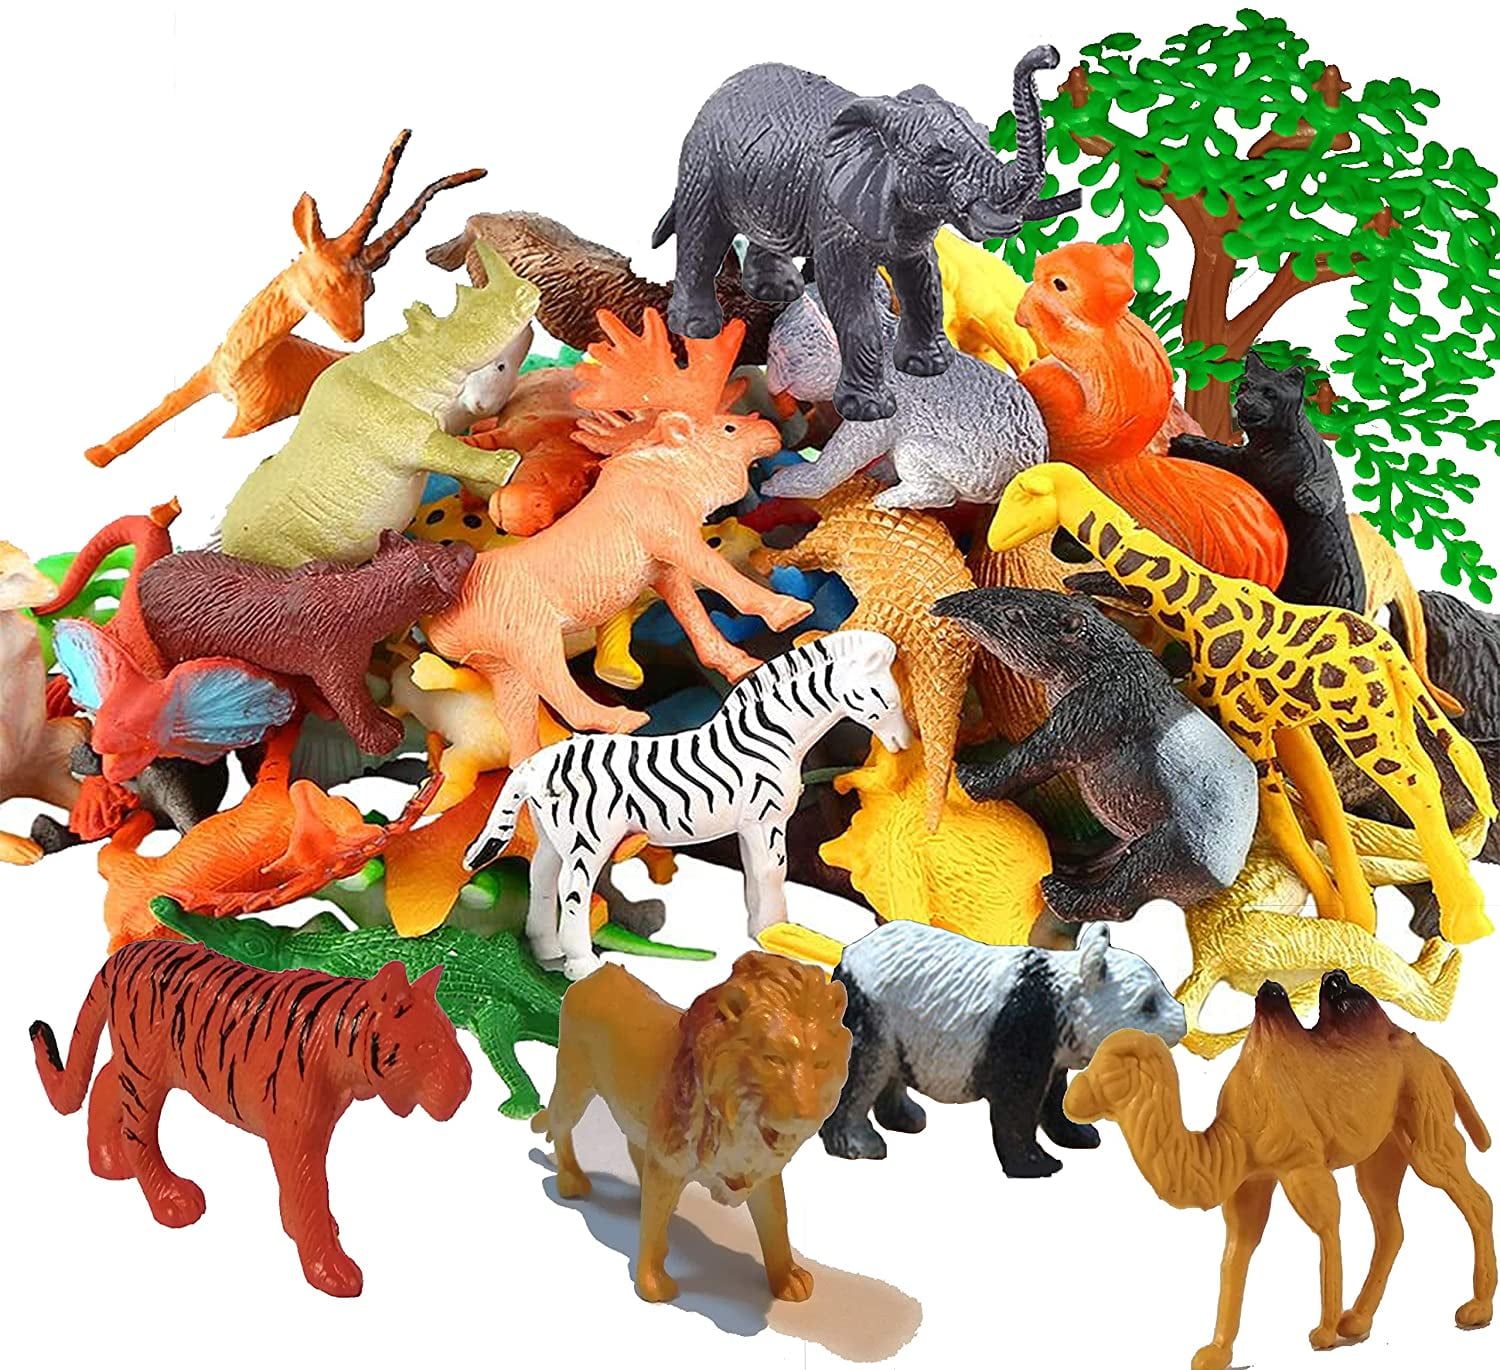 Lion or Elephant Tiger 15 pcs WOODEN FLOOR PUZZLE T-Rex for ages 3+ Years 